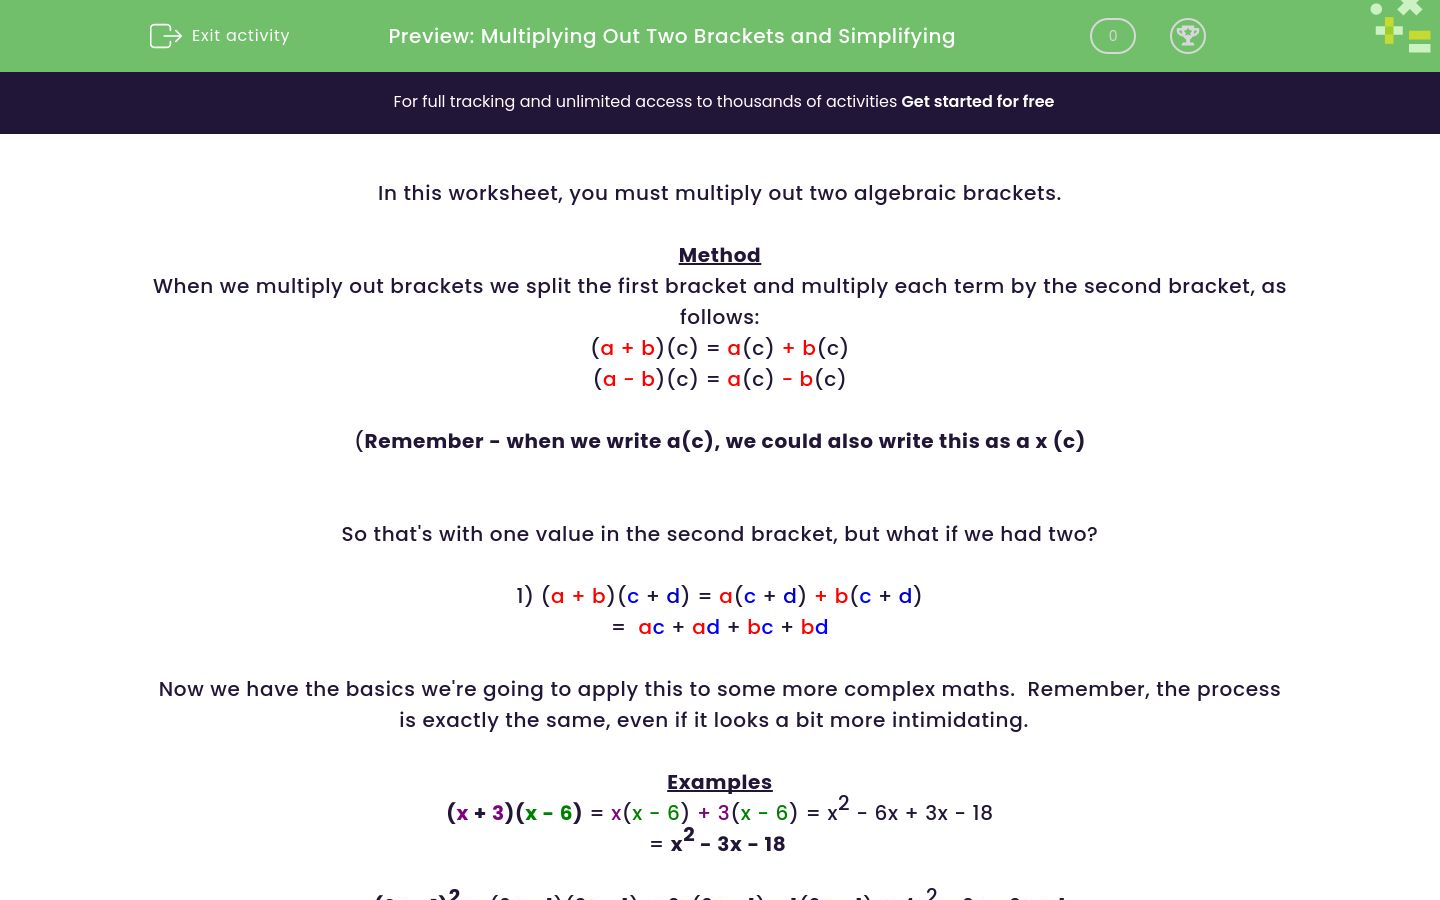 Multiply Out Two Brackets and Simplify Worksheet - EdPlace